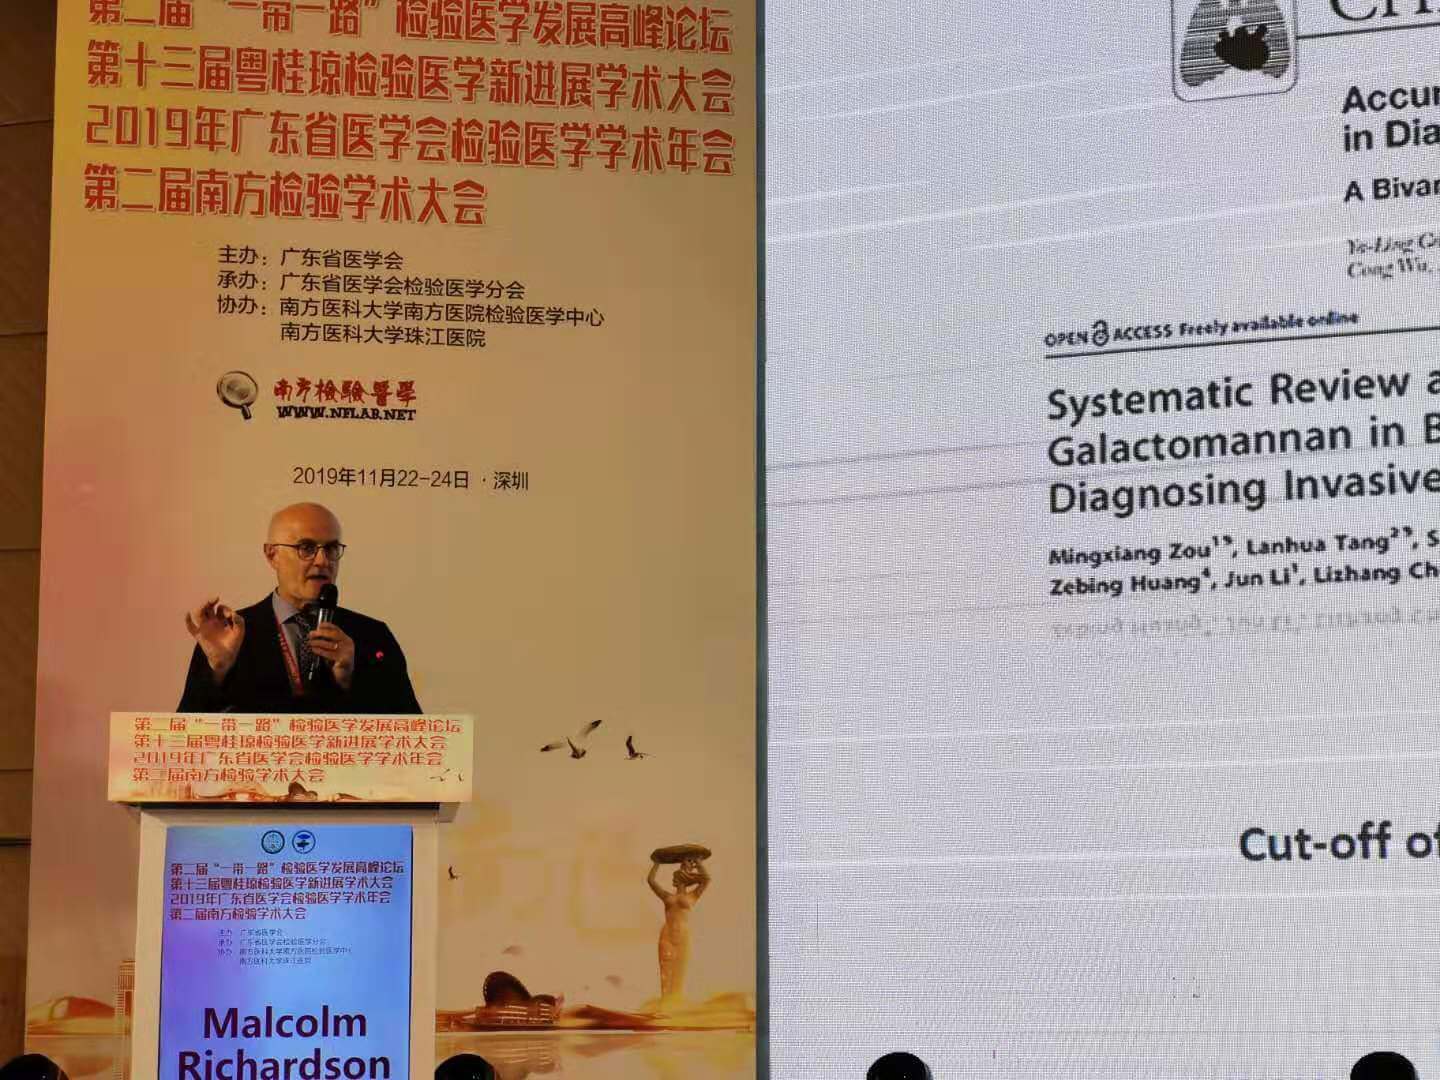 Guangdong Medical Association Annual Meeting on Medical Laboratory 